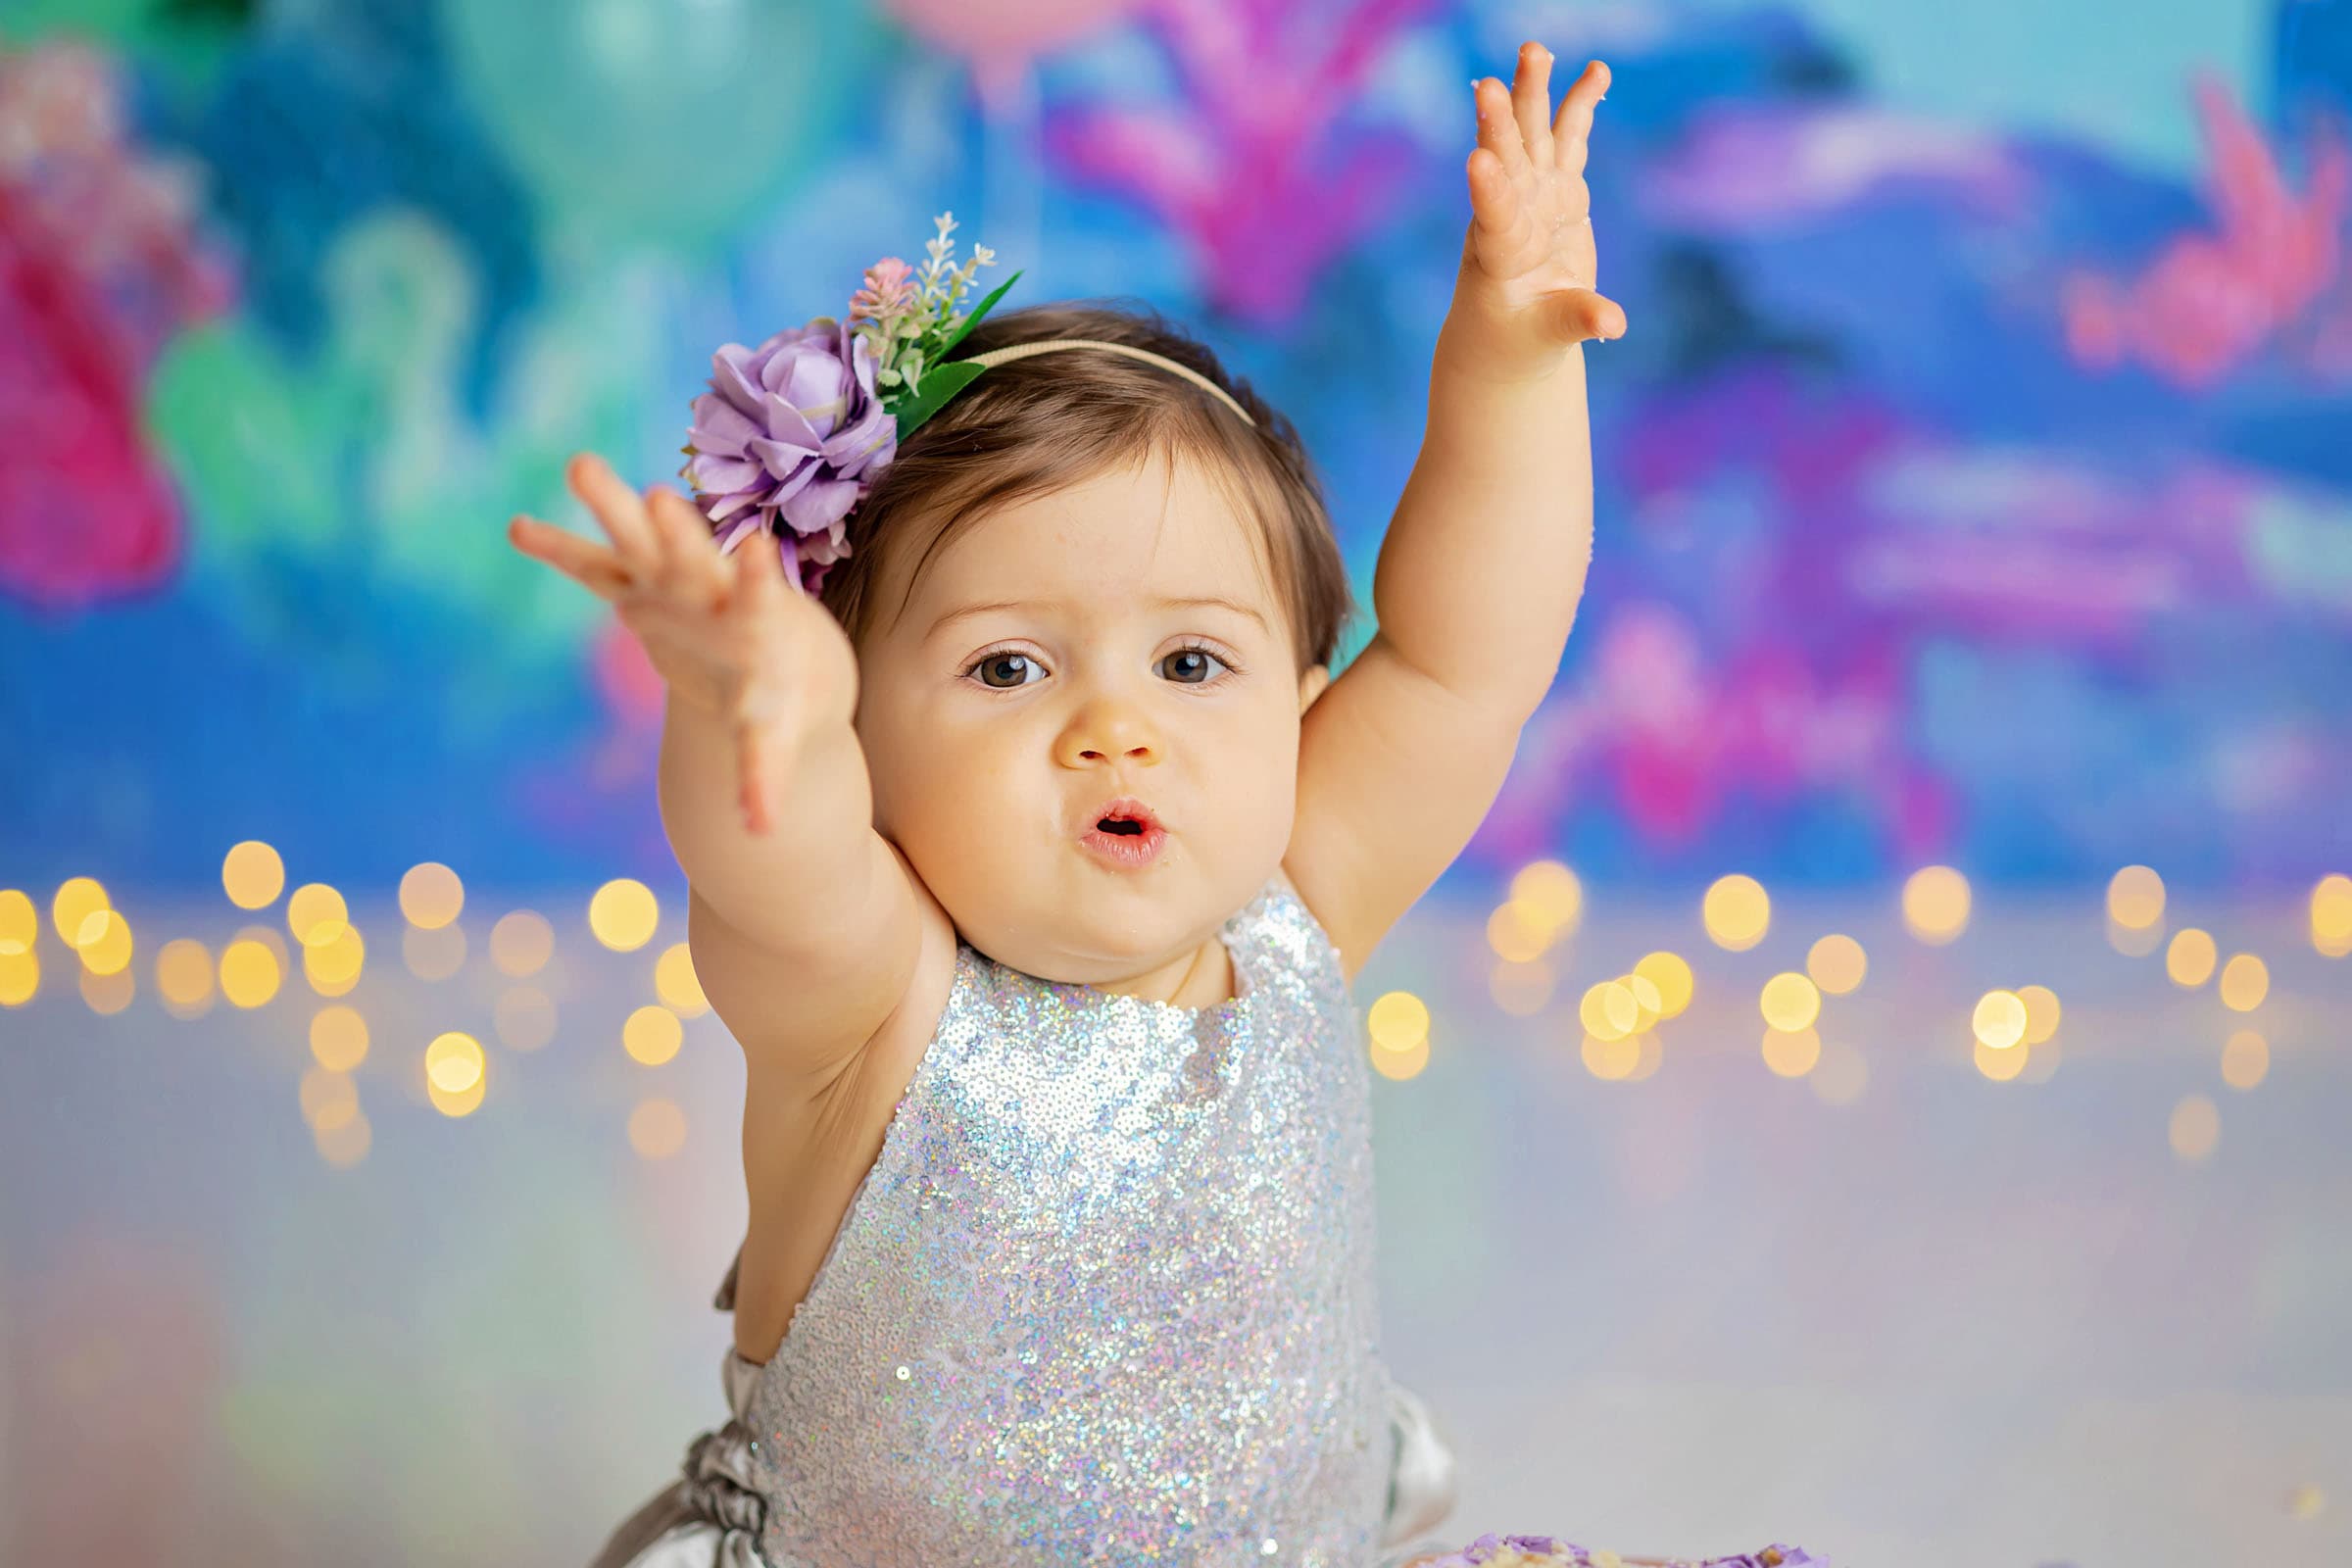 Portrait of a baby girl holding her hands up